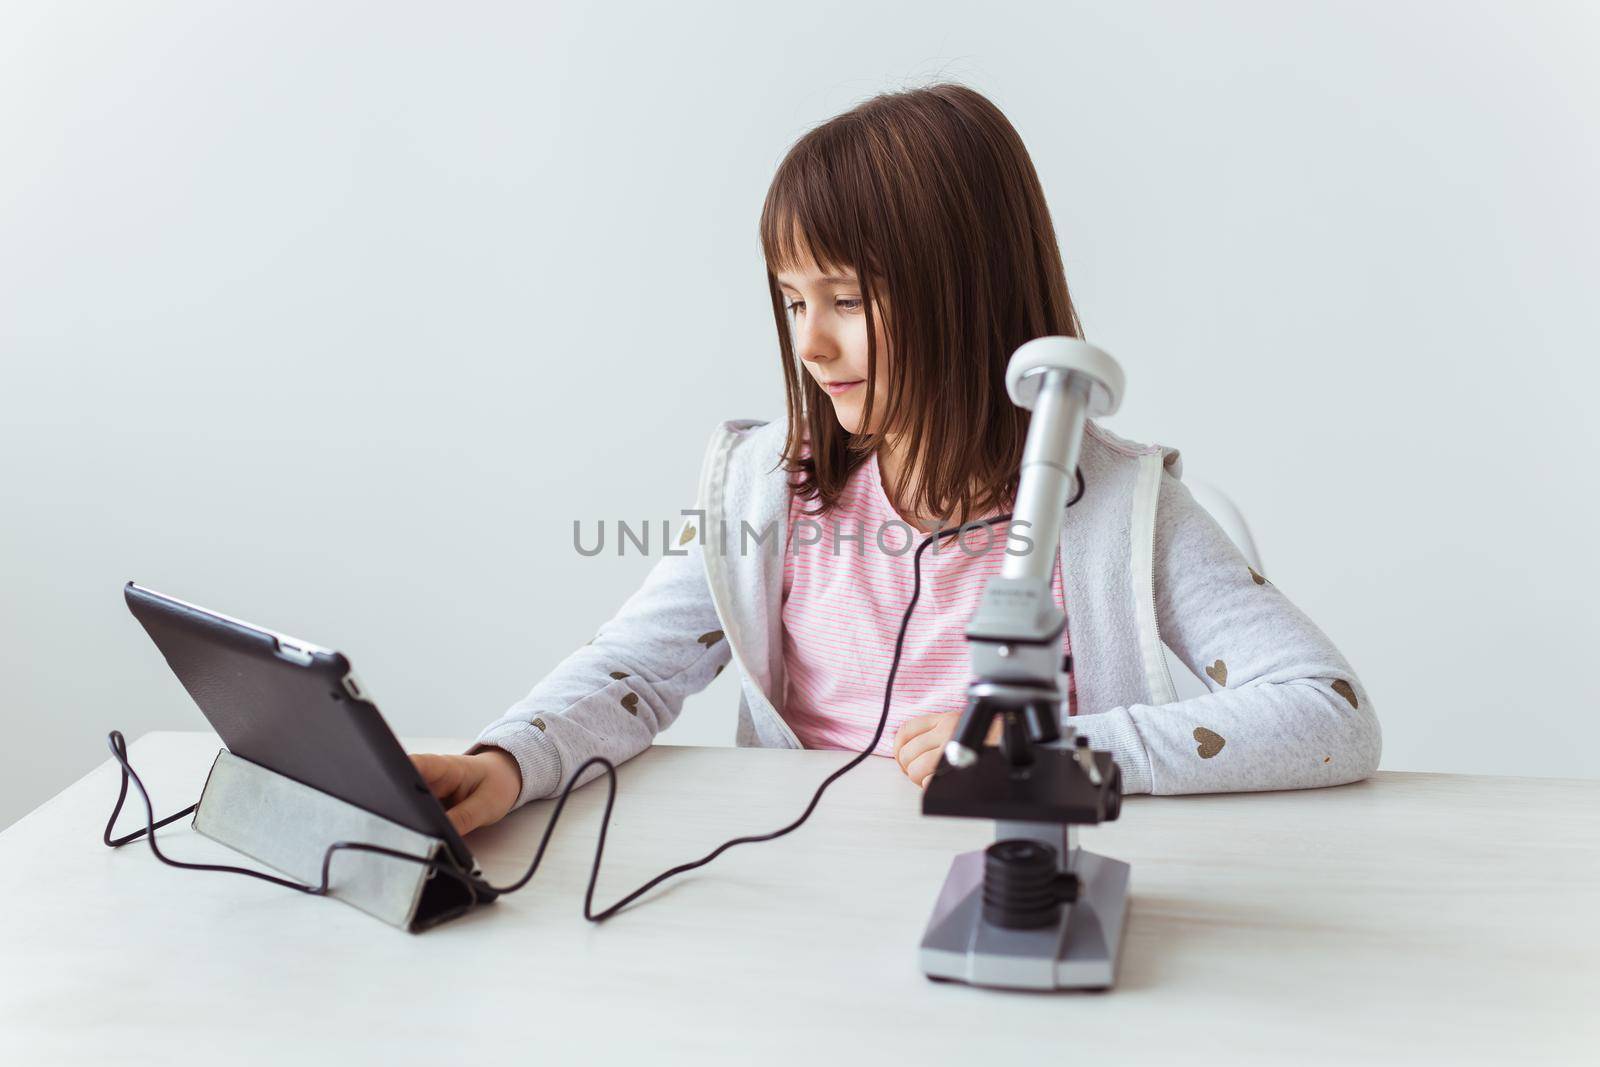 Portrait of cute little child doing homework with a digital microscope Technologies, science and children.